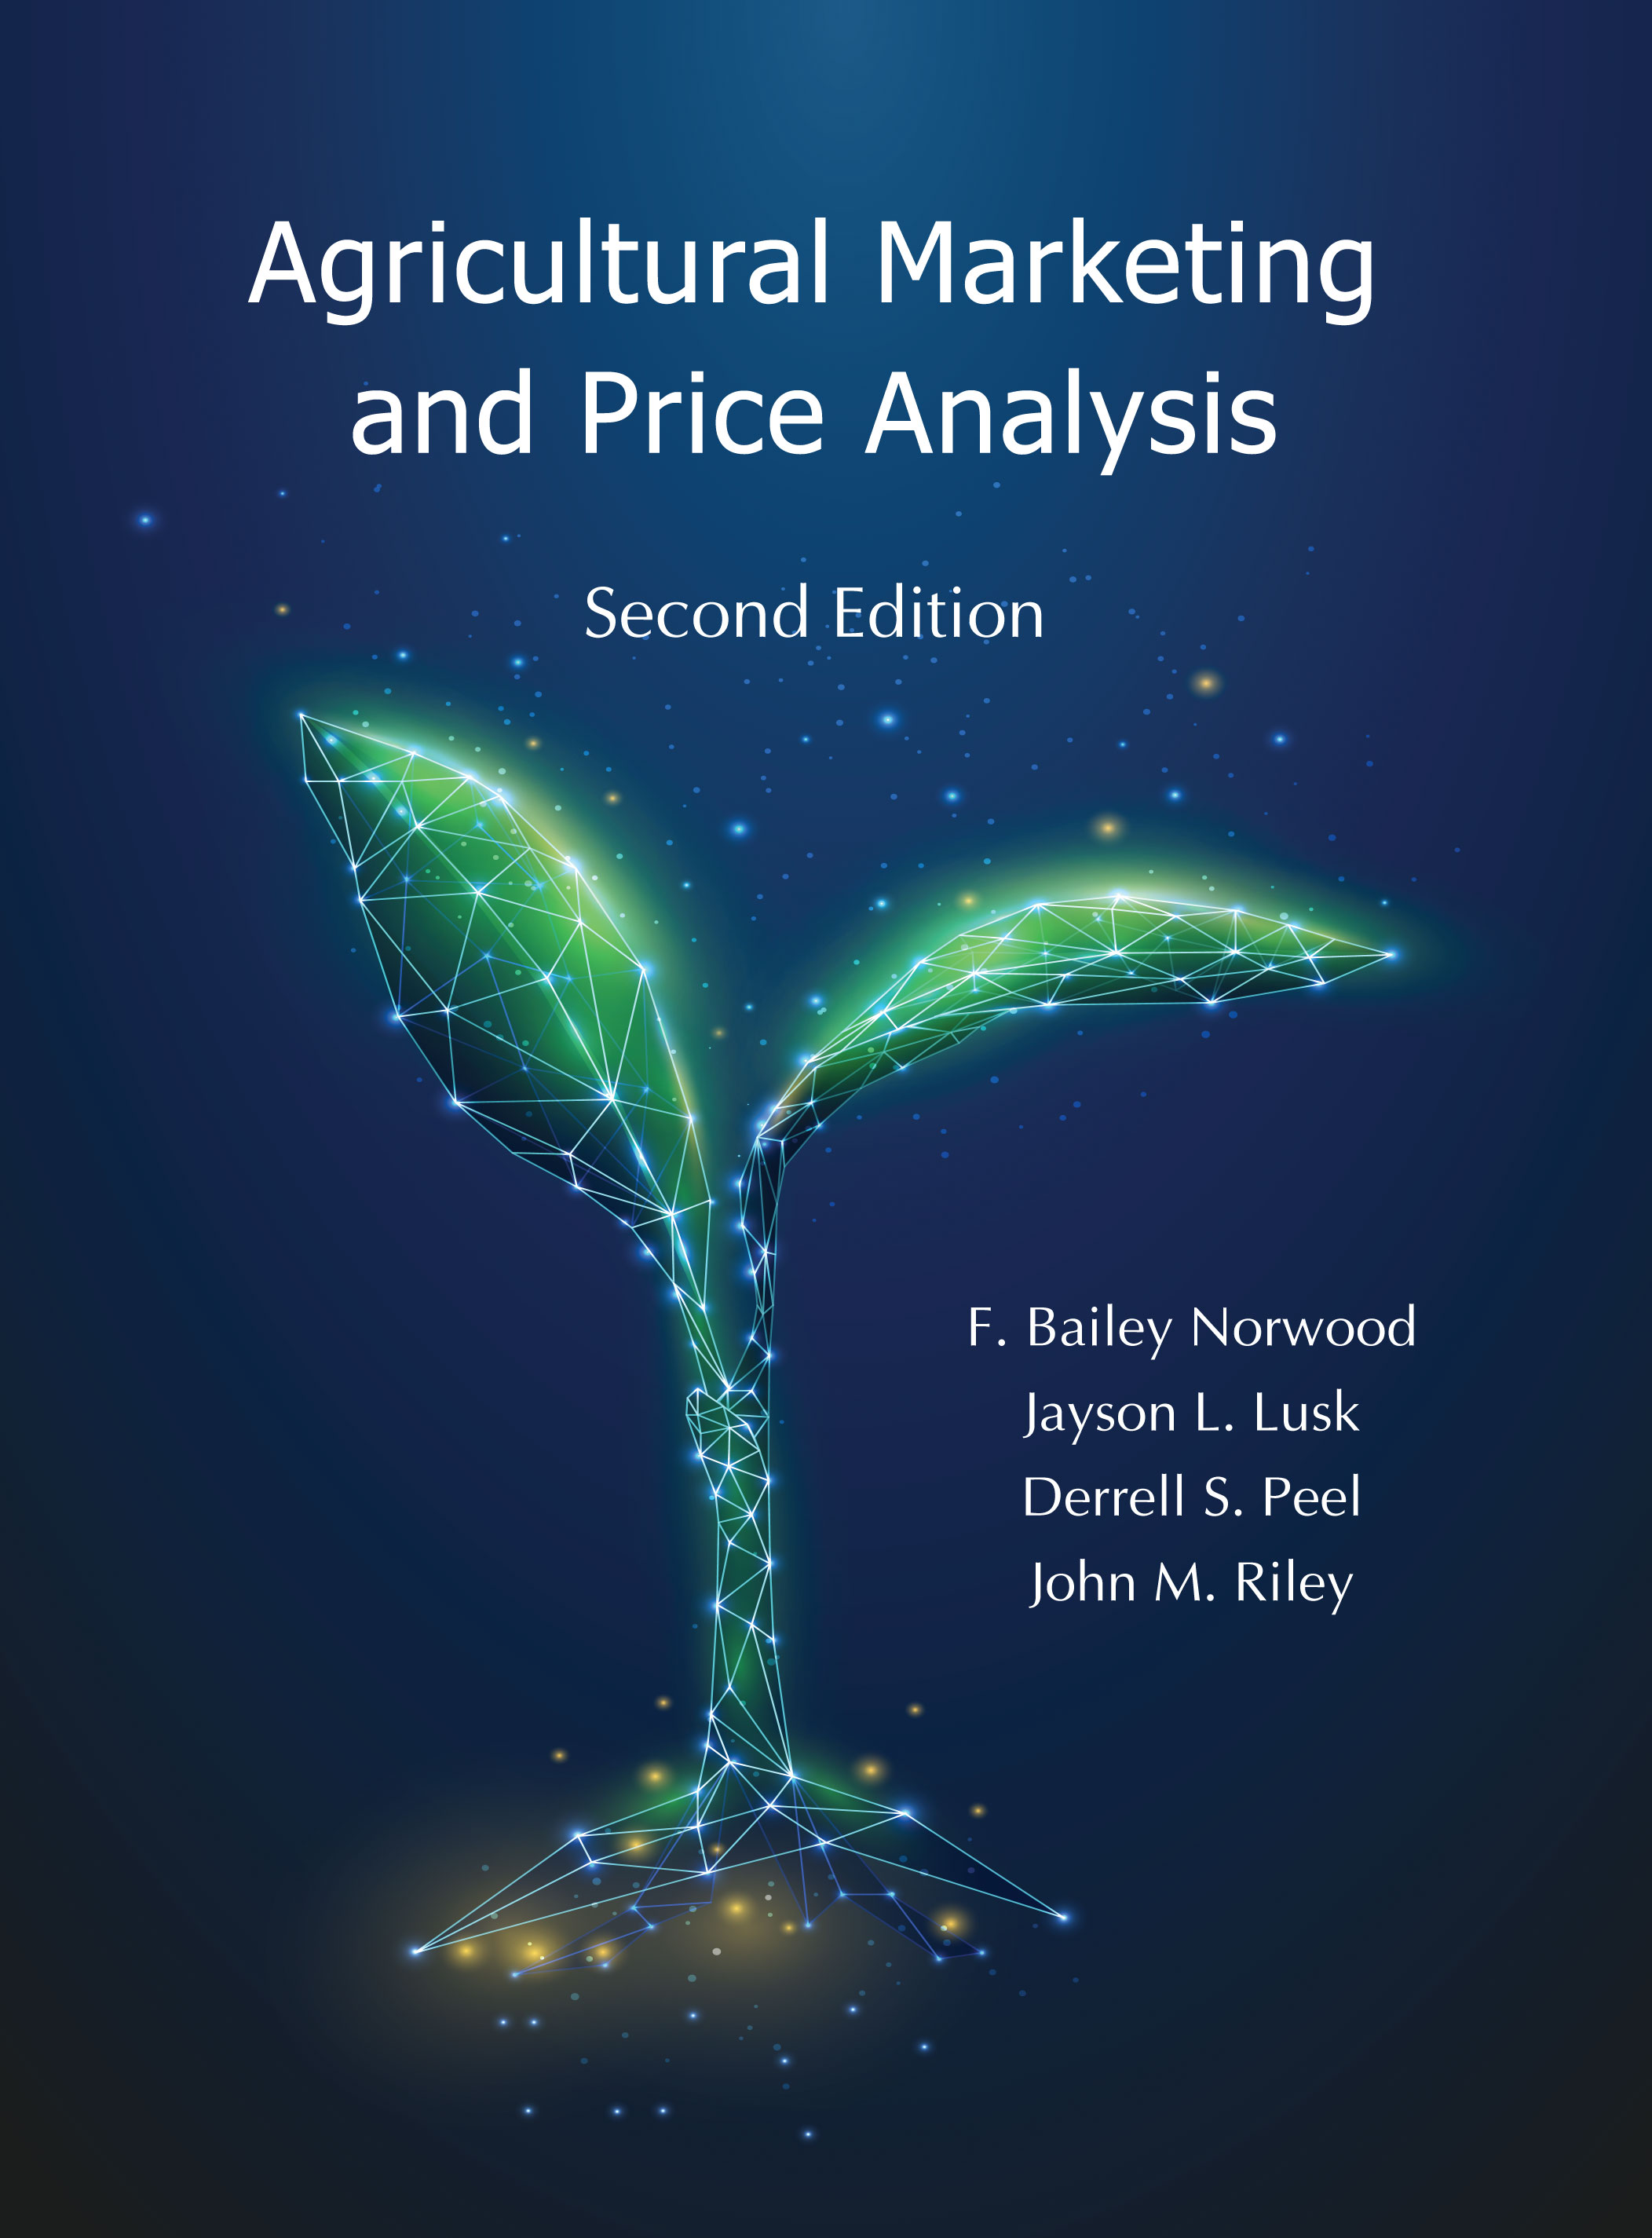 Agricultural Marketing and Price Analysis: Second Edition by F. Bailey Norwood, Jayson L. Lusk, Derrell S. Peel, John M. Riley